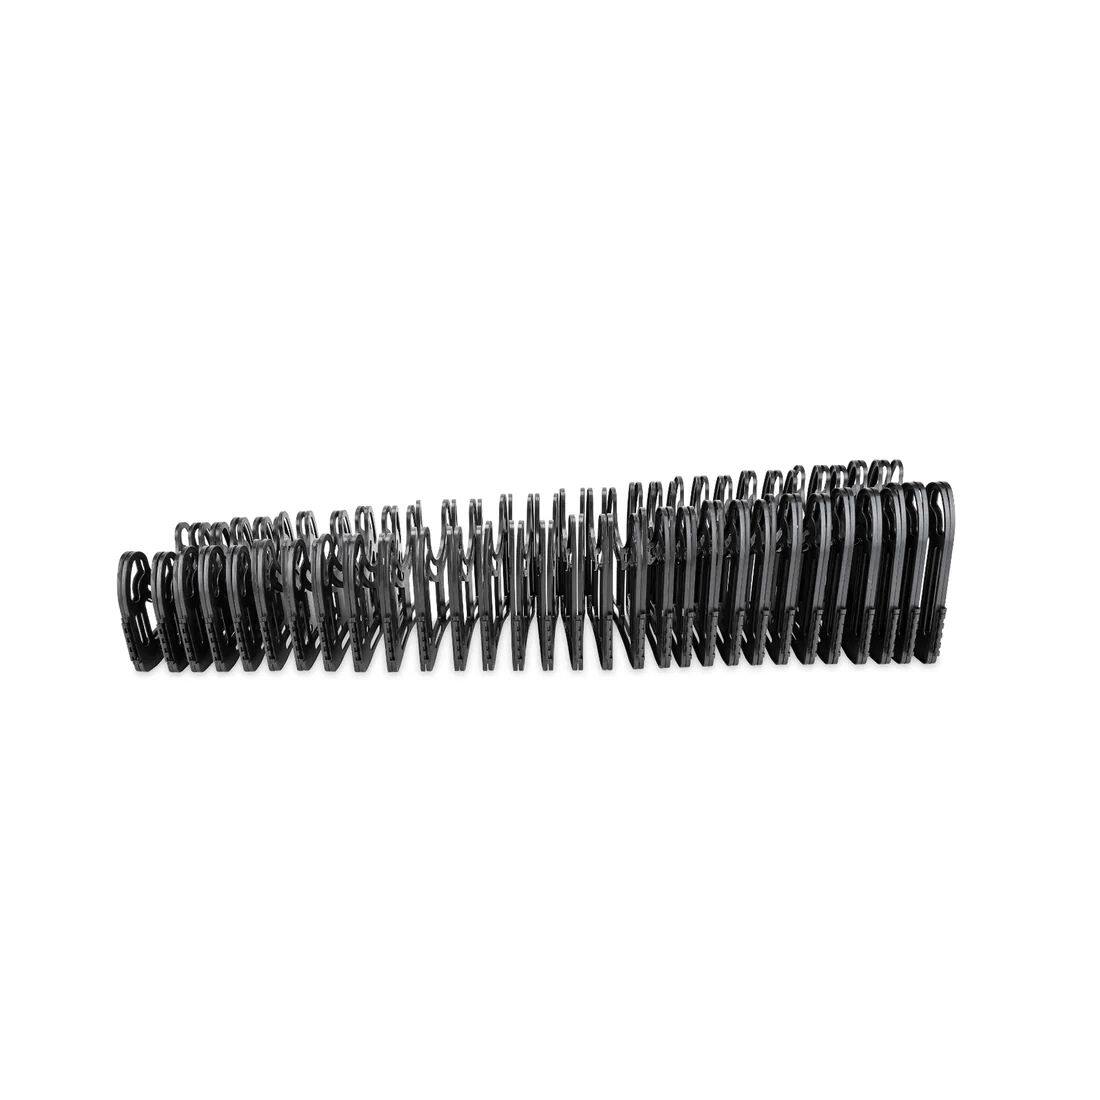 CAMCO 43061 30-ft Plastic RV Sidewinder Sewer Hose Support